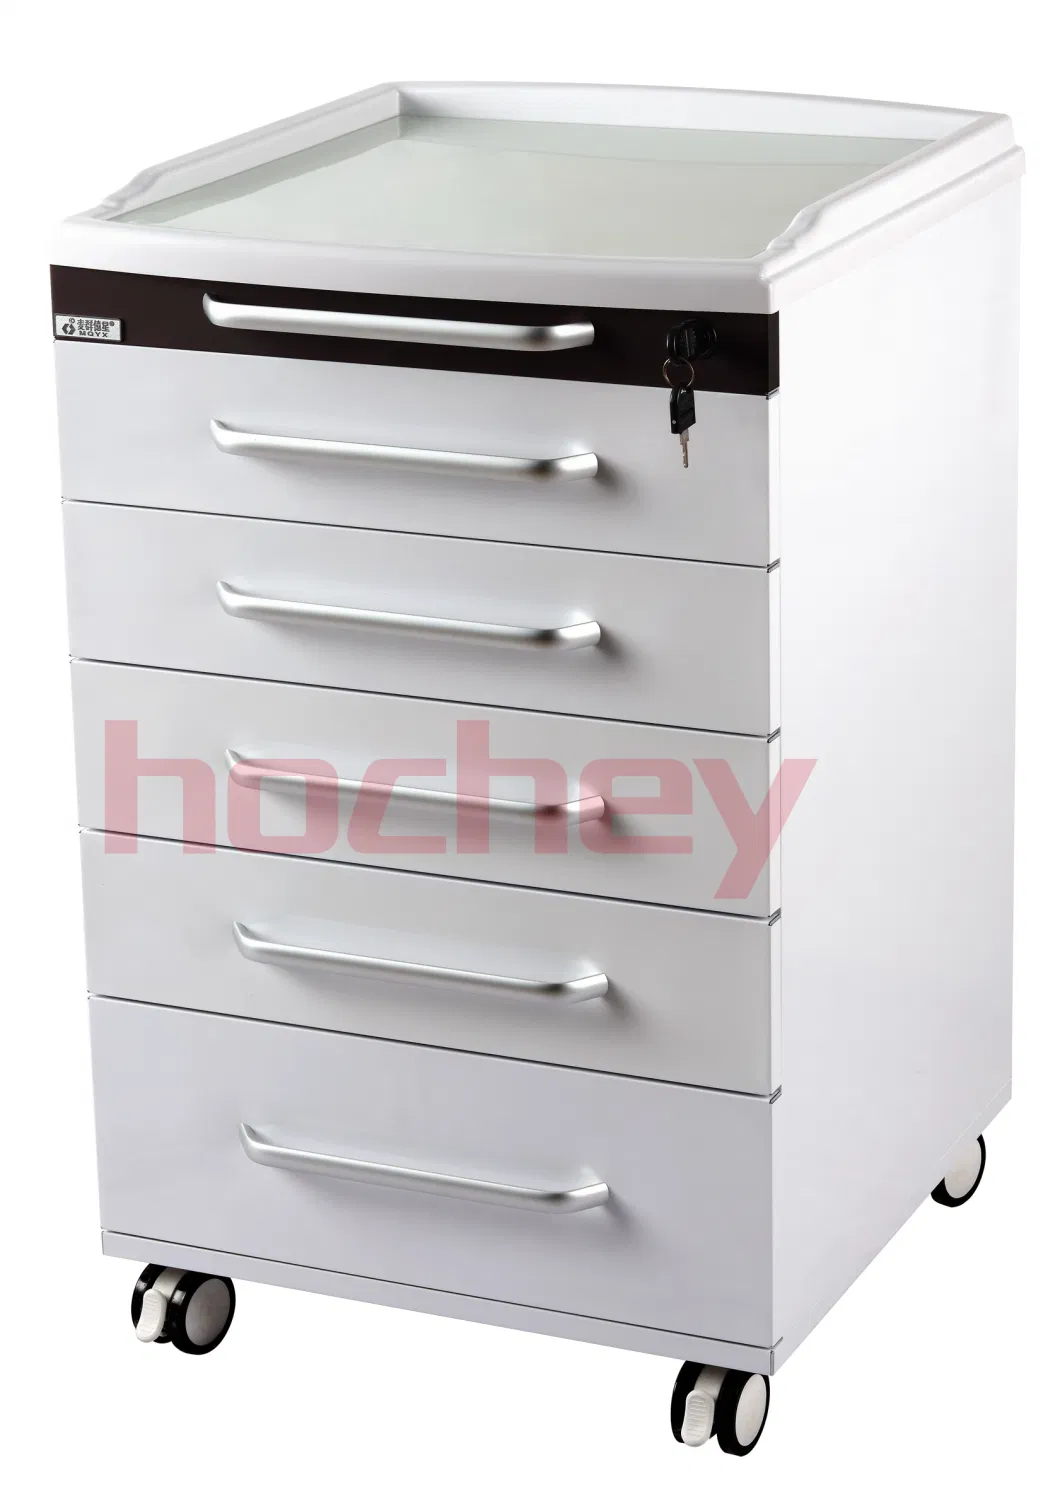 Hochey Medical ABS Countertop Stainless Steel Body Mobile Cart Dental Cabinet